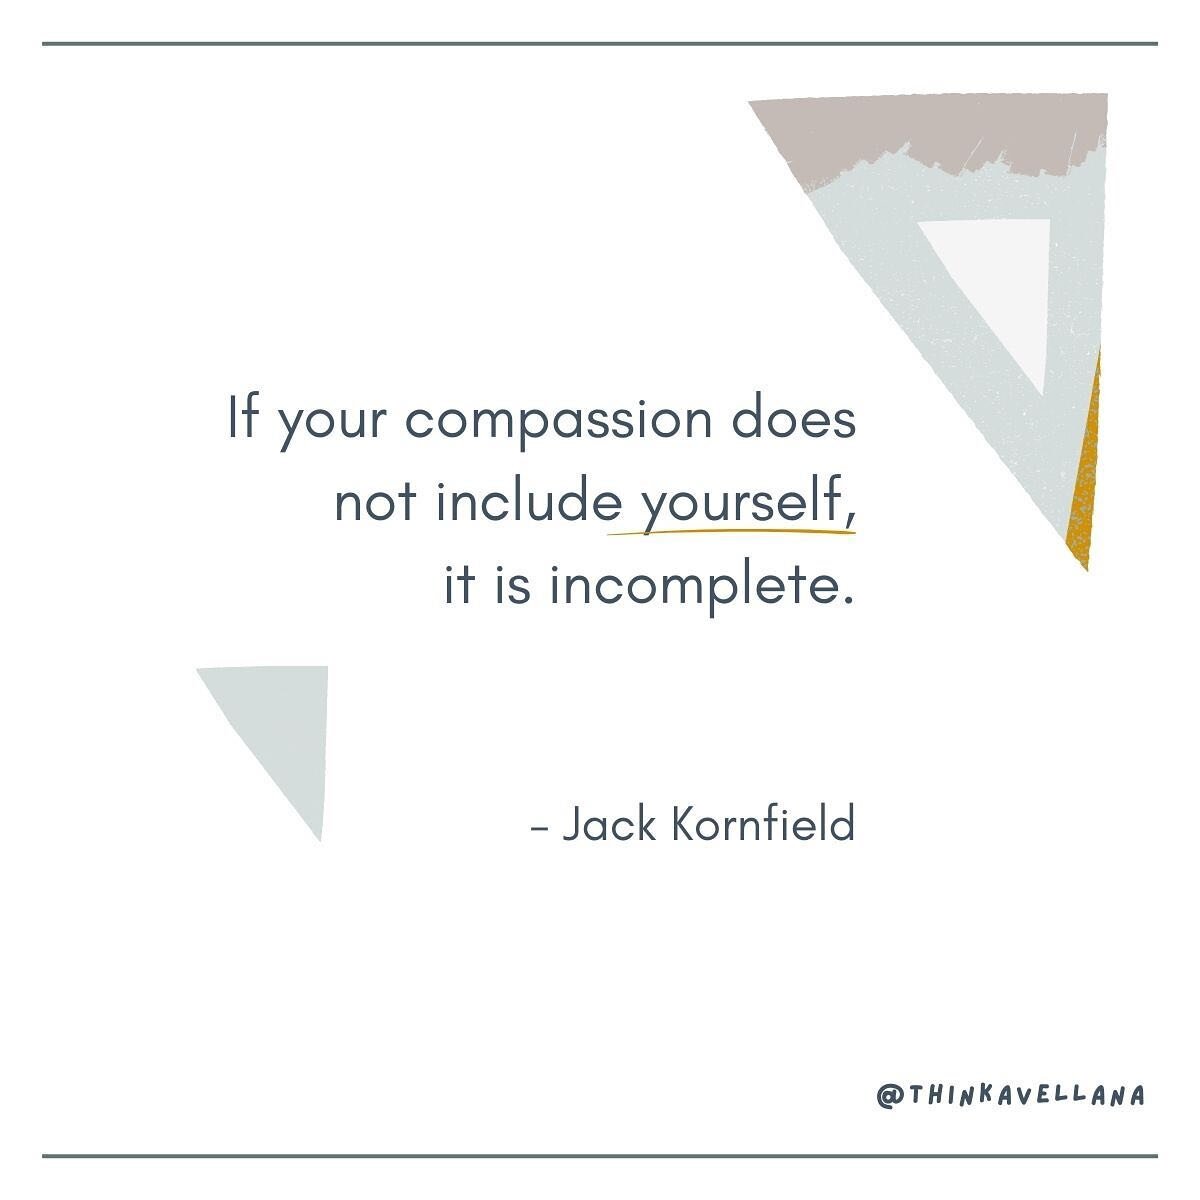 The irony with self compassion is that although we're aware it's supportive of our own mental health when we treat ourselves with kindness, what often happens is the critical voice inside our heads gives us a hard time about NOT being self compassion